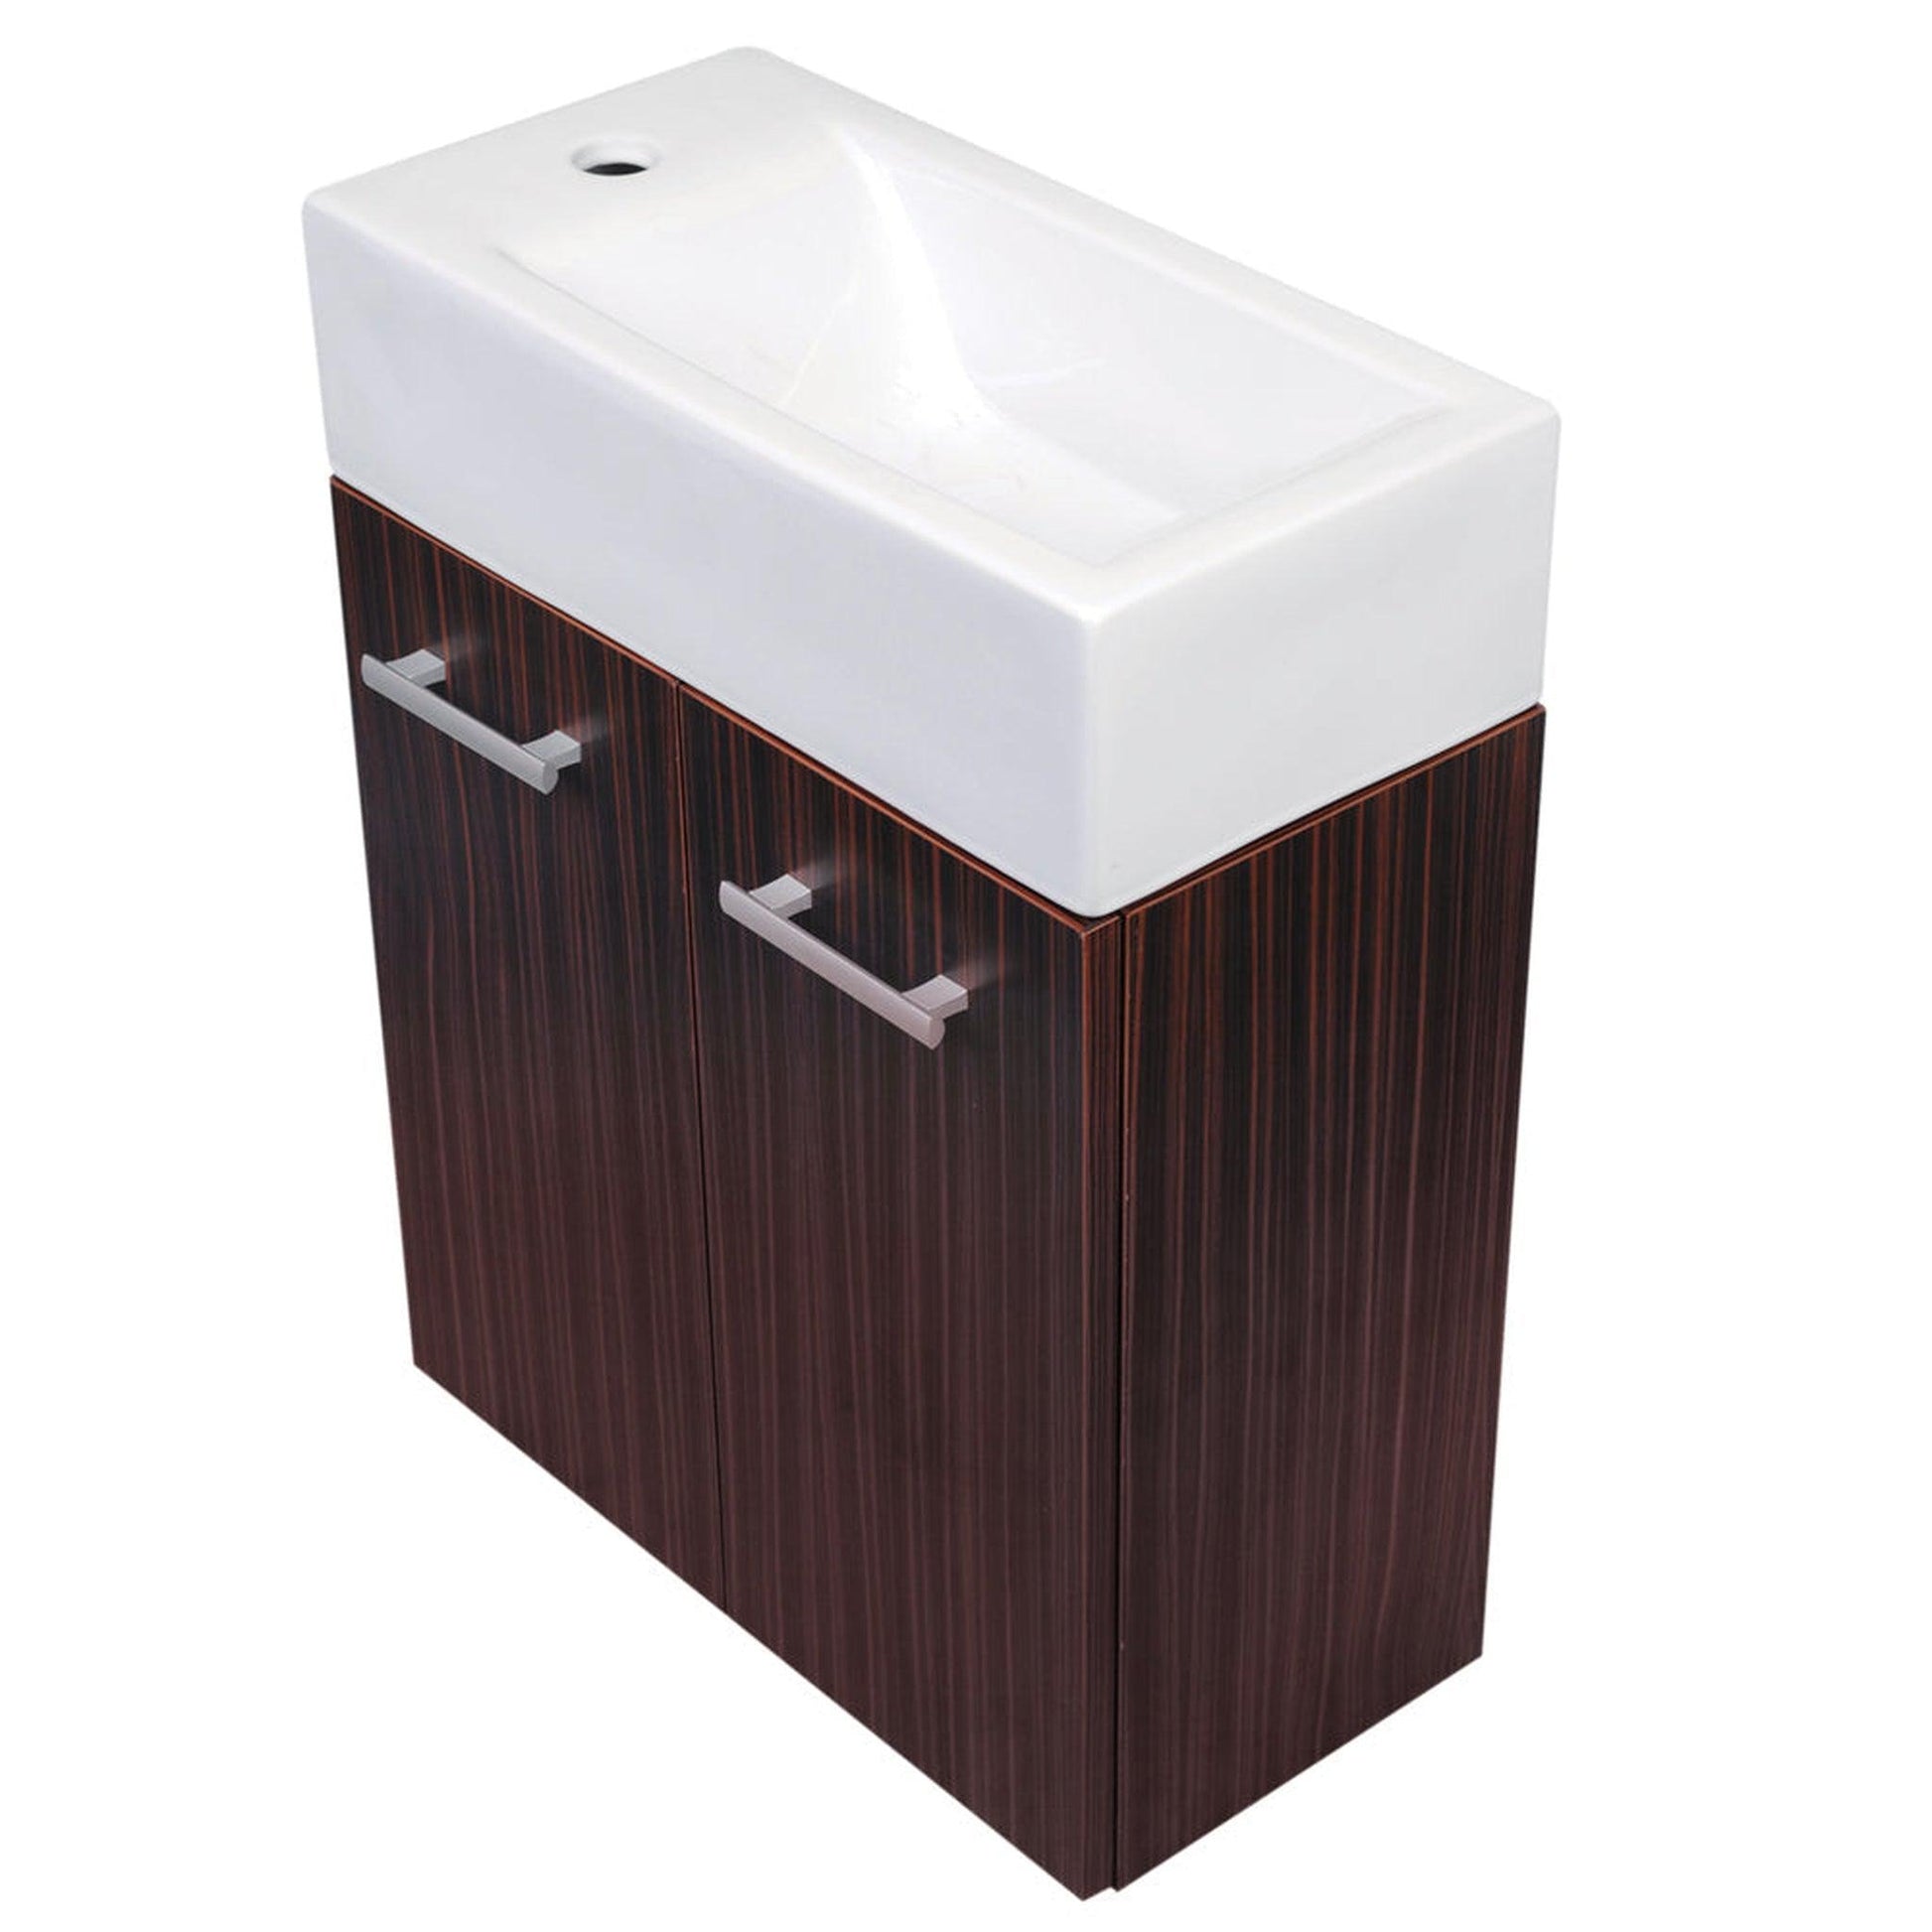 Whitehaus Isabella WH114LSCB-E Wall Mount Double Door Vanity In Espresso Complete With a White Basin